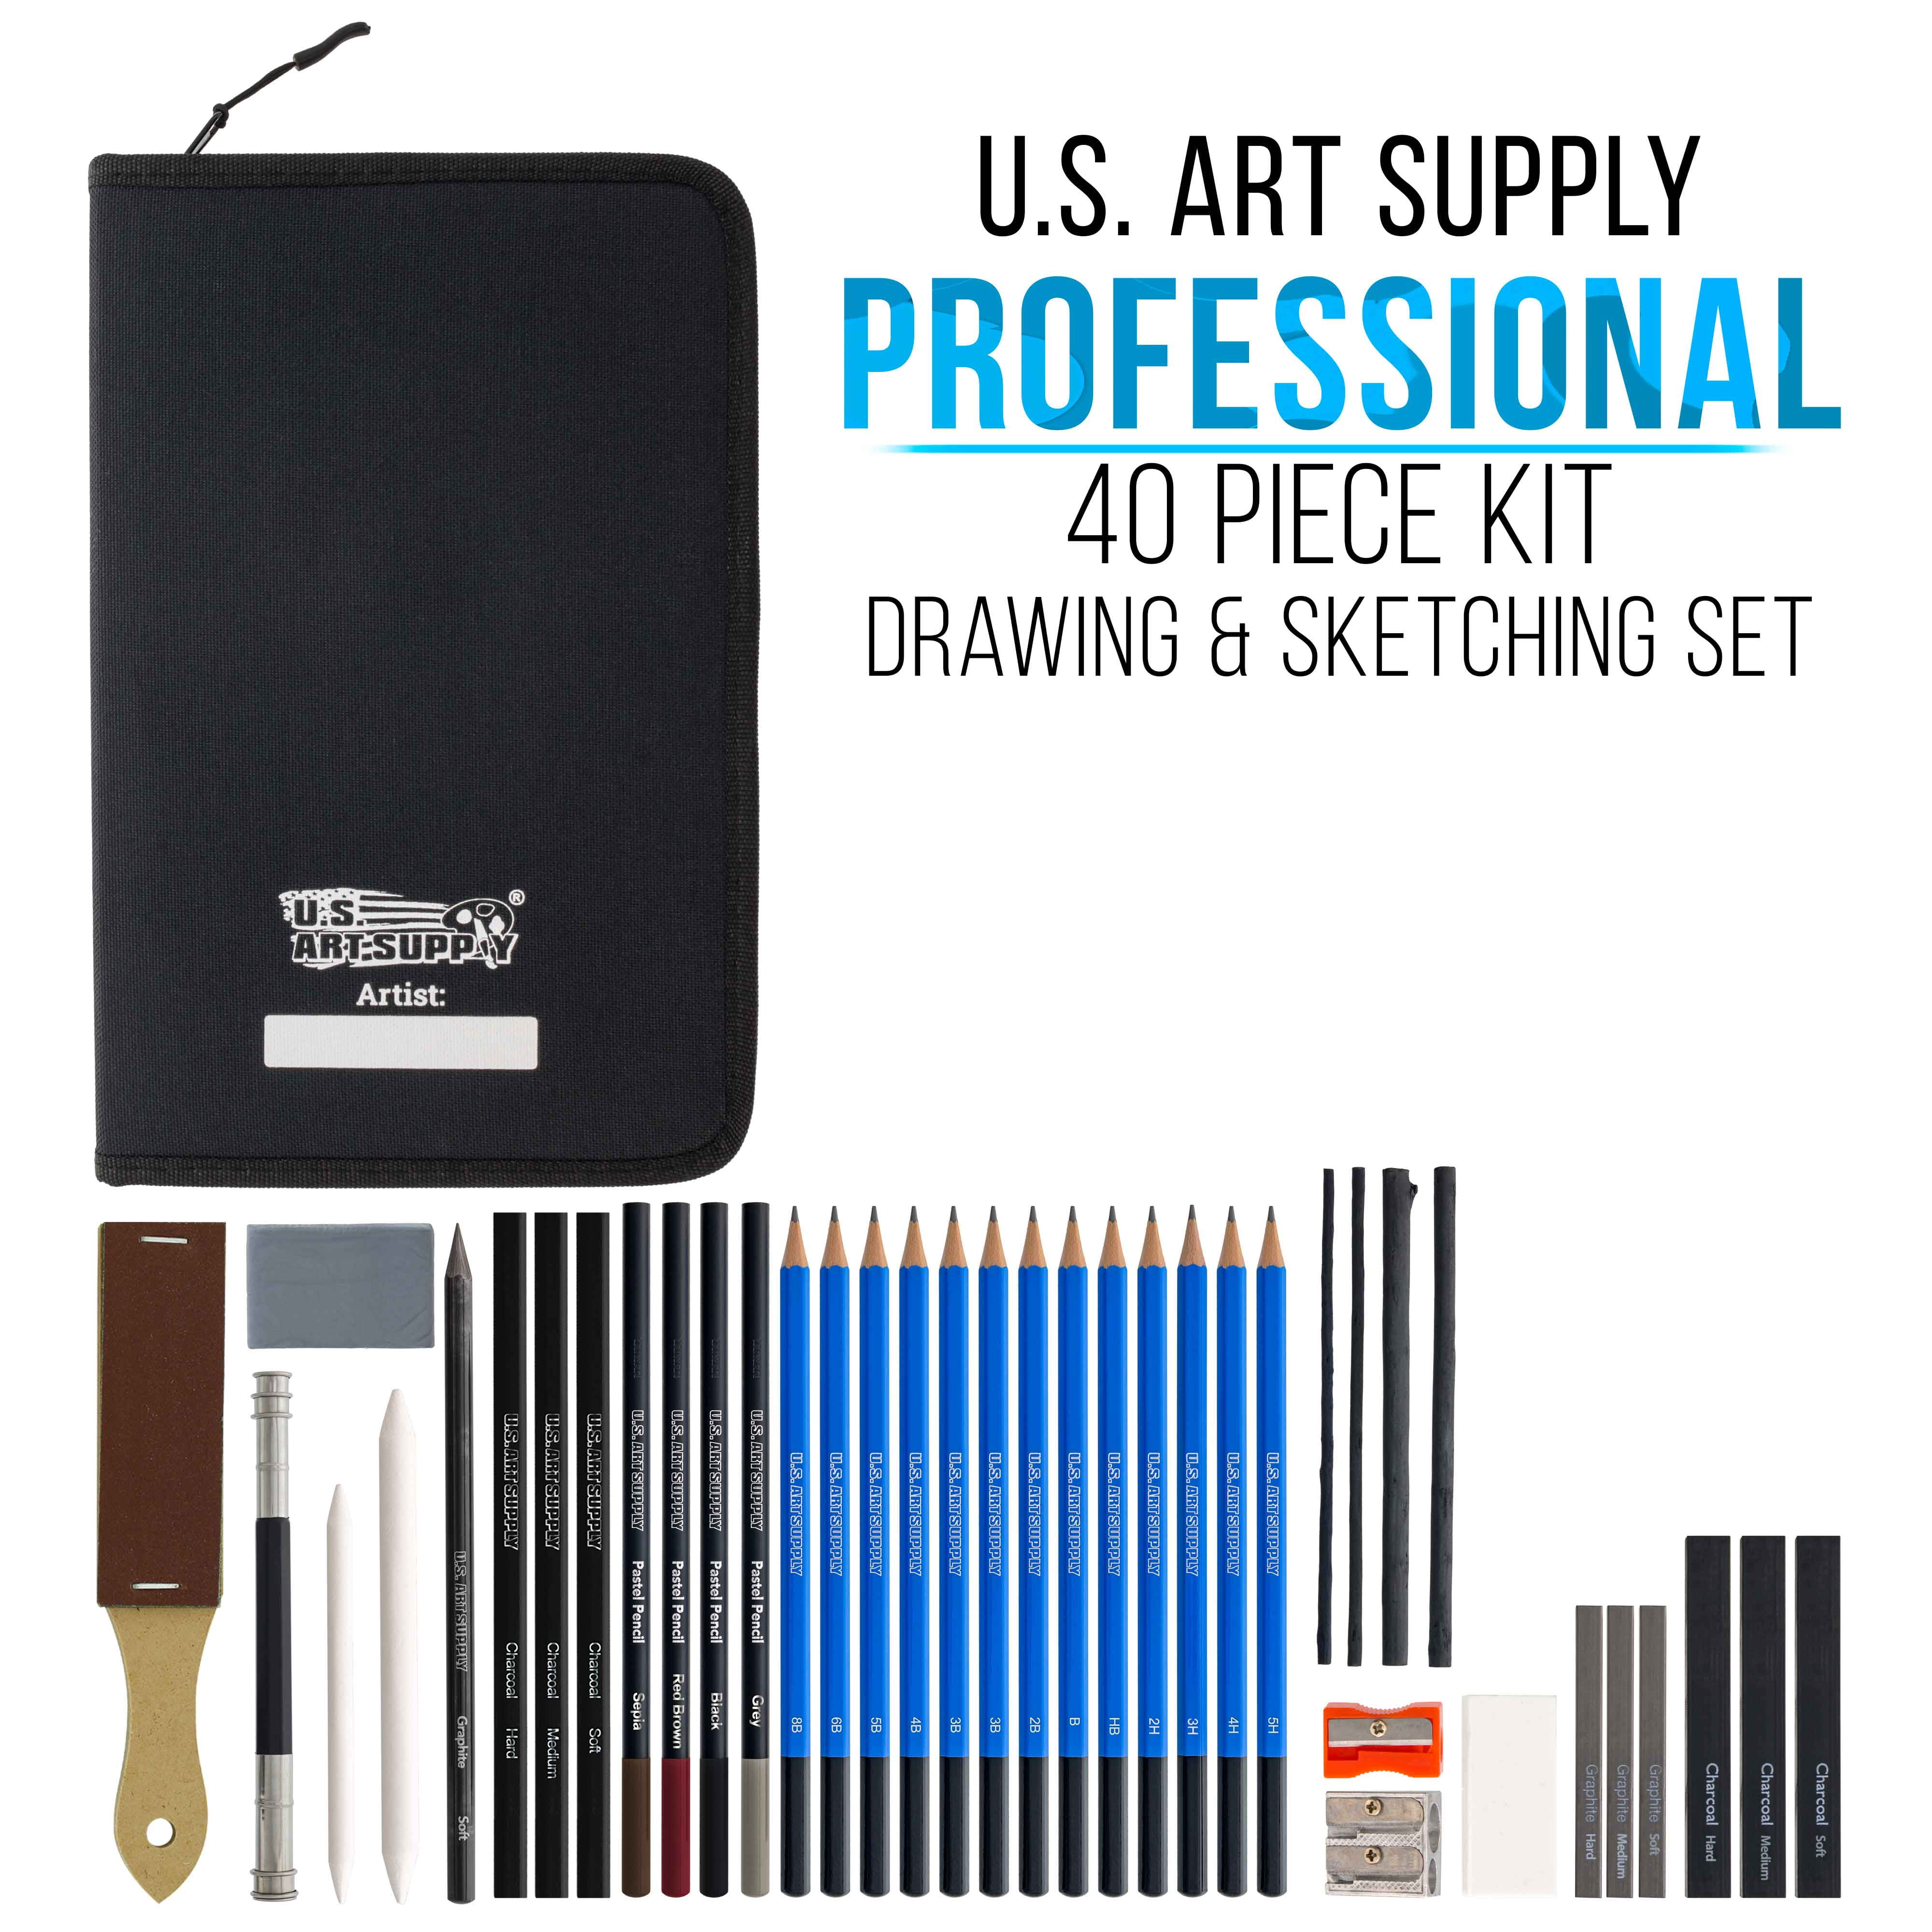 U.S. Art Supply 44-Piece Drawing & Sketching Art Set with 4 Sketch Pads  (242 Paper Sheets) - Professional Artist Kit, Graphite, Charcoal, Pastel